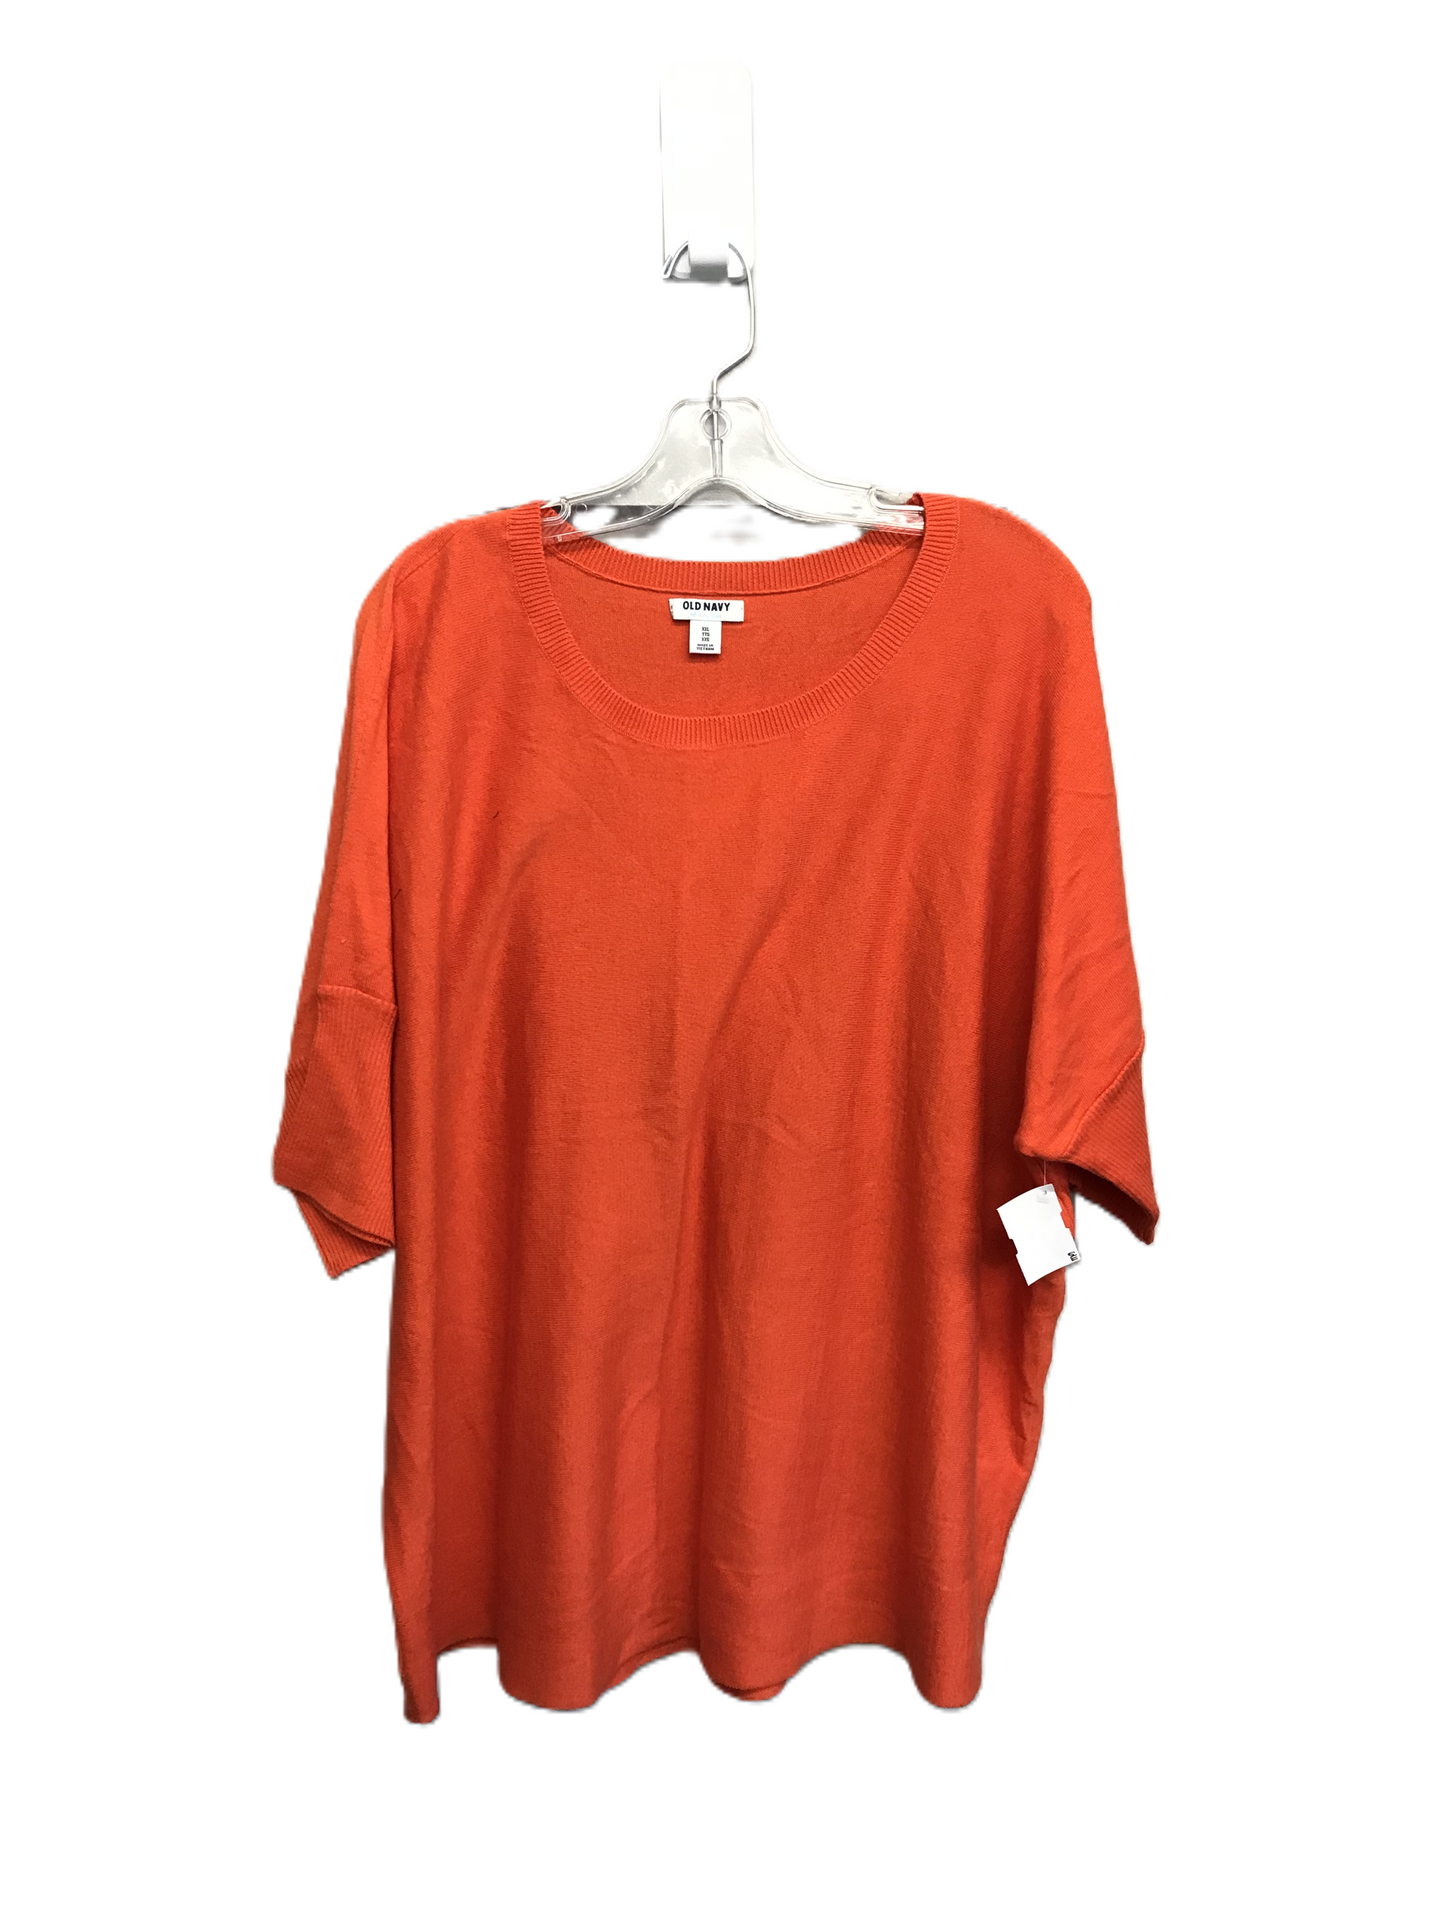 Orange Top Short Sleeve By Old Navy, Size: 1x